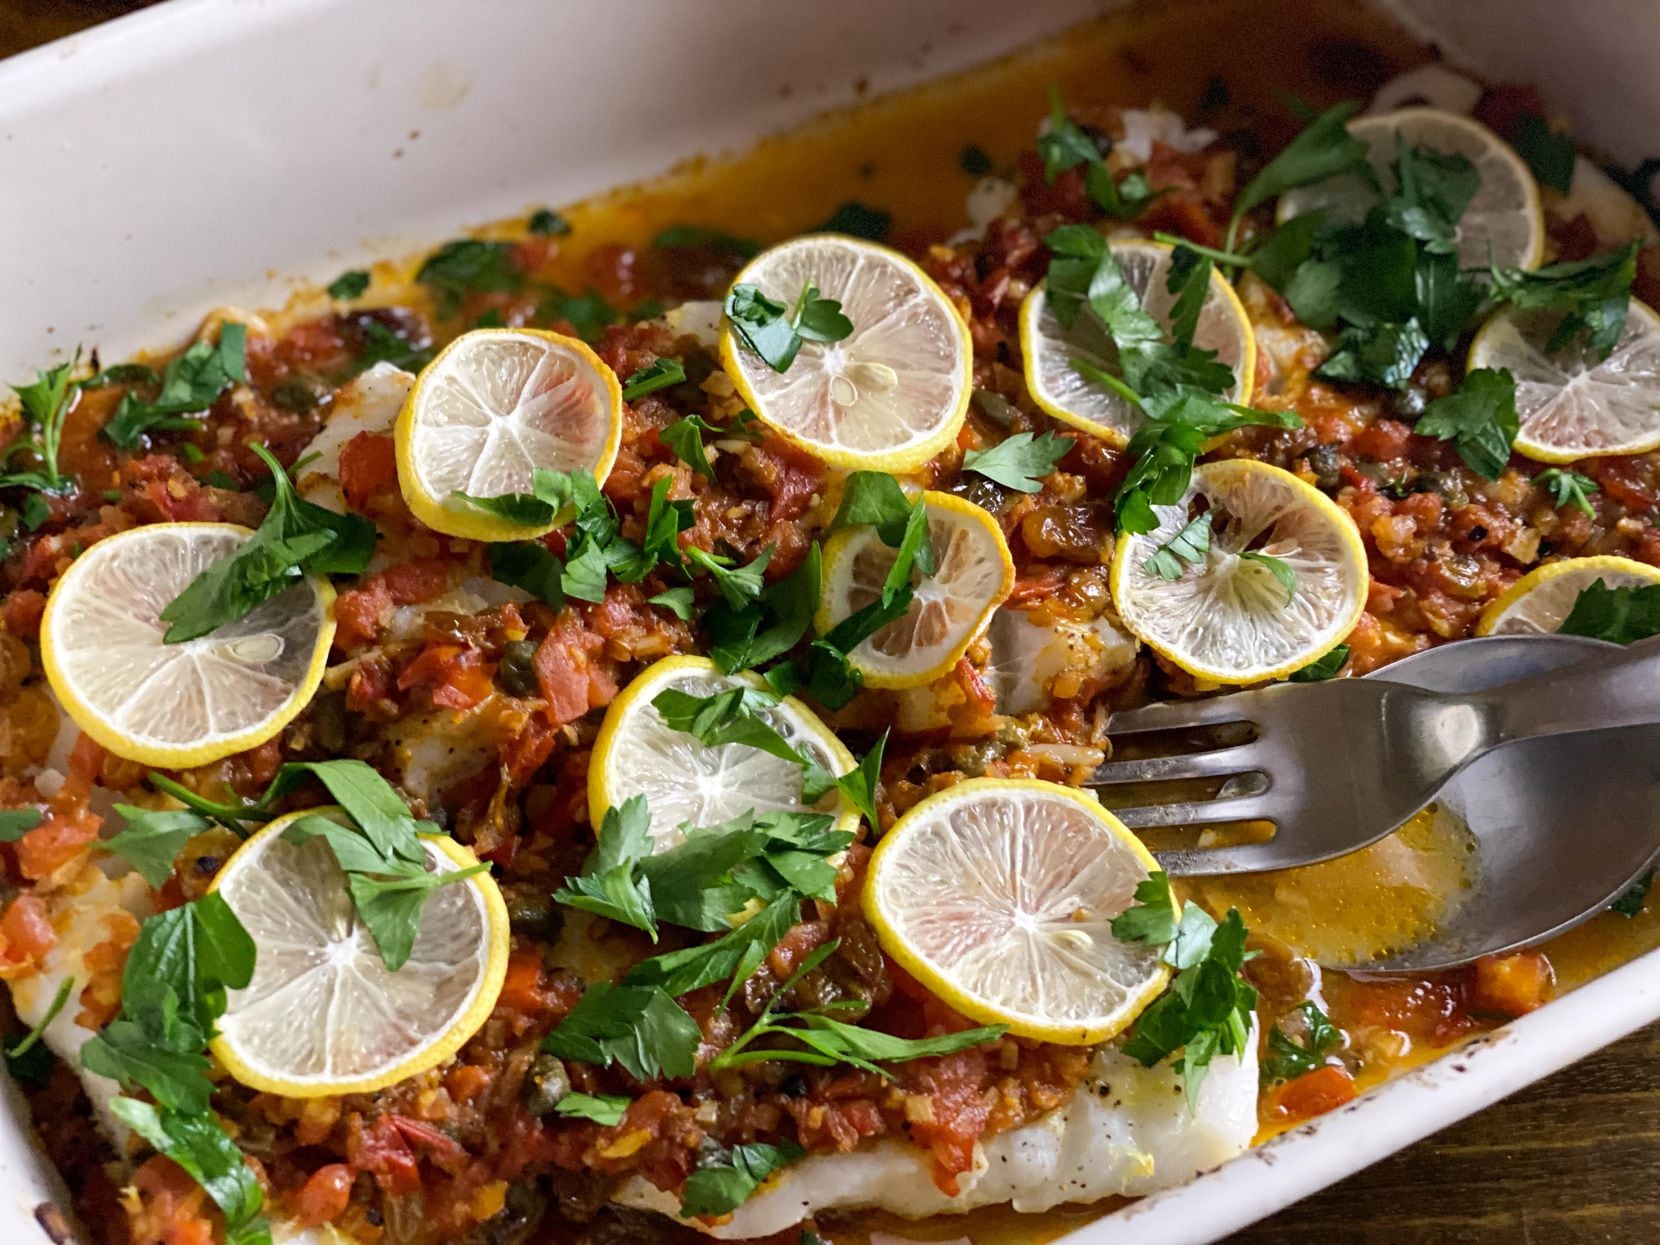 Saucy Tomato Baked Cod with Garlic, Capers and Raisins from The Mediterranean Dish, by Suzy...